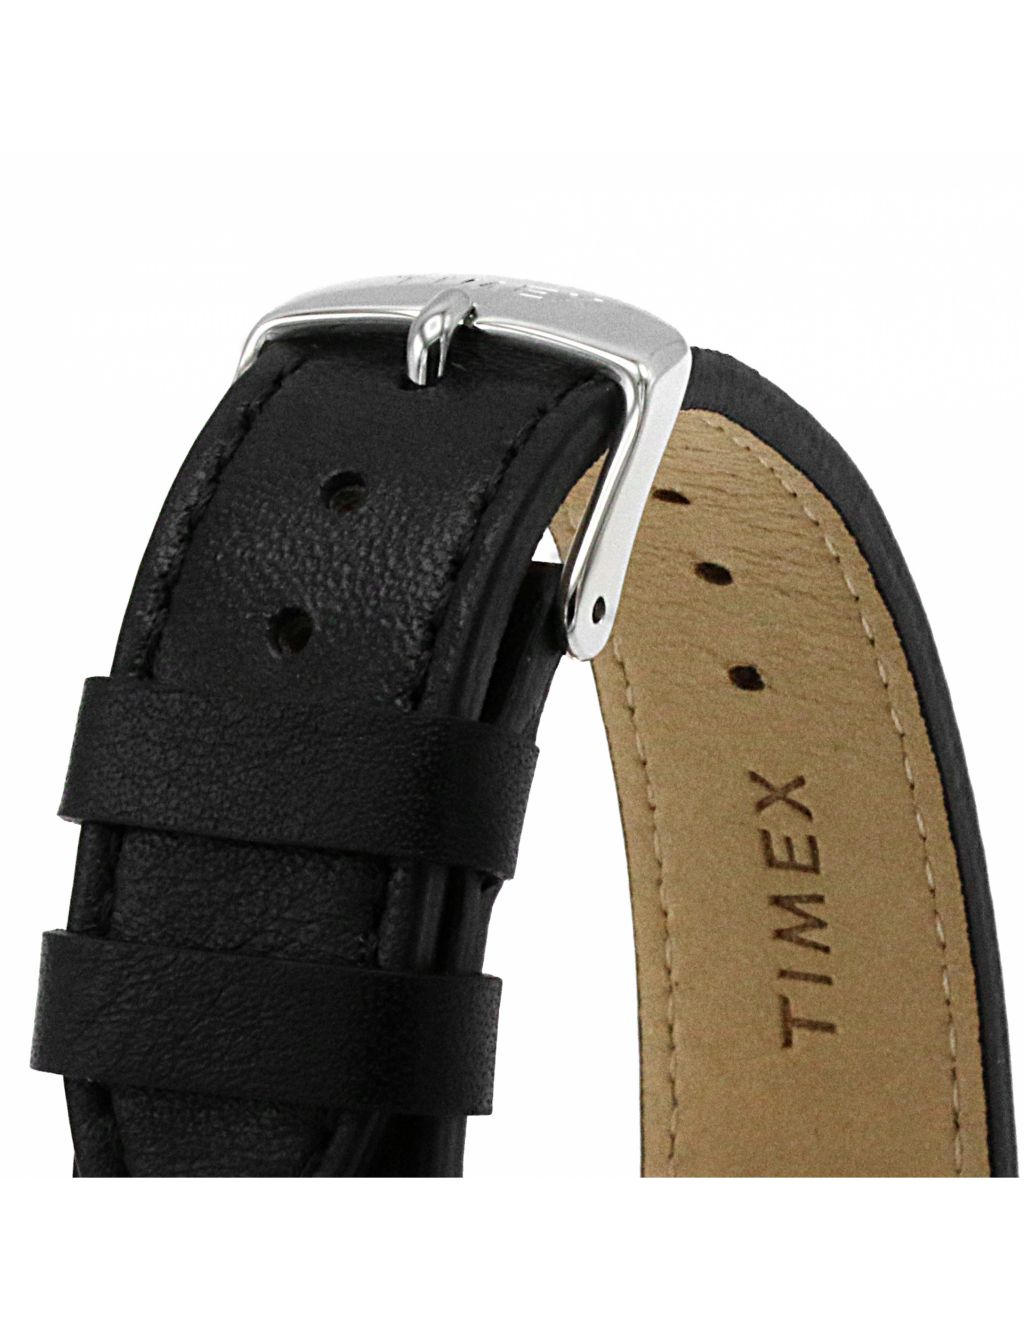 Timex Essential Black Leather Watch image 6